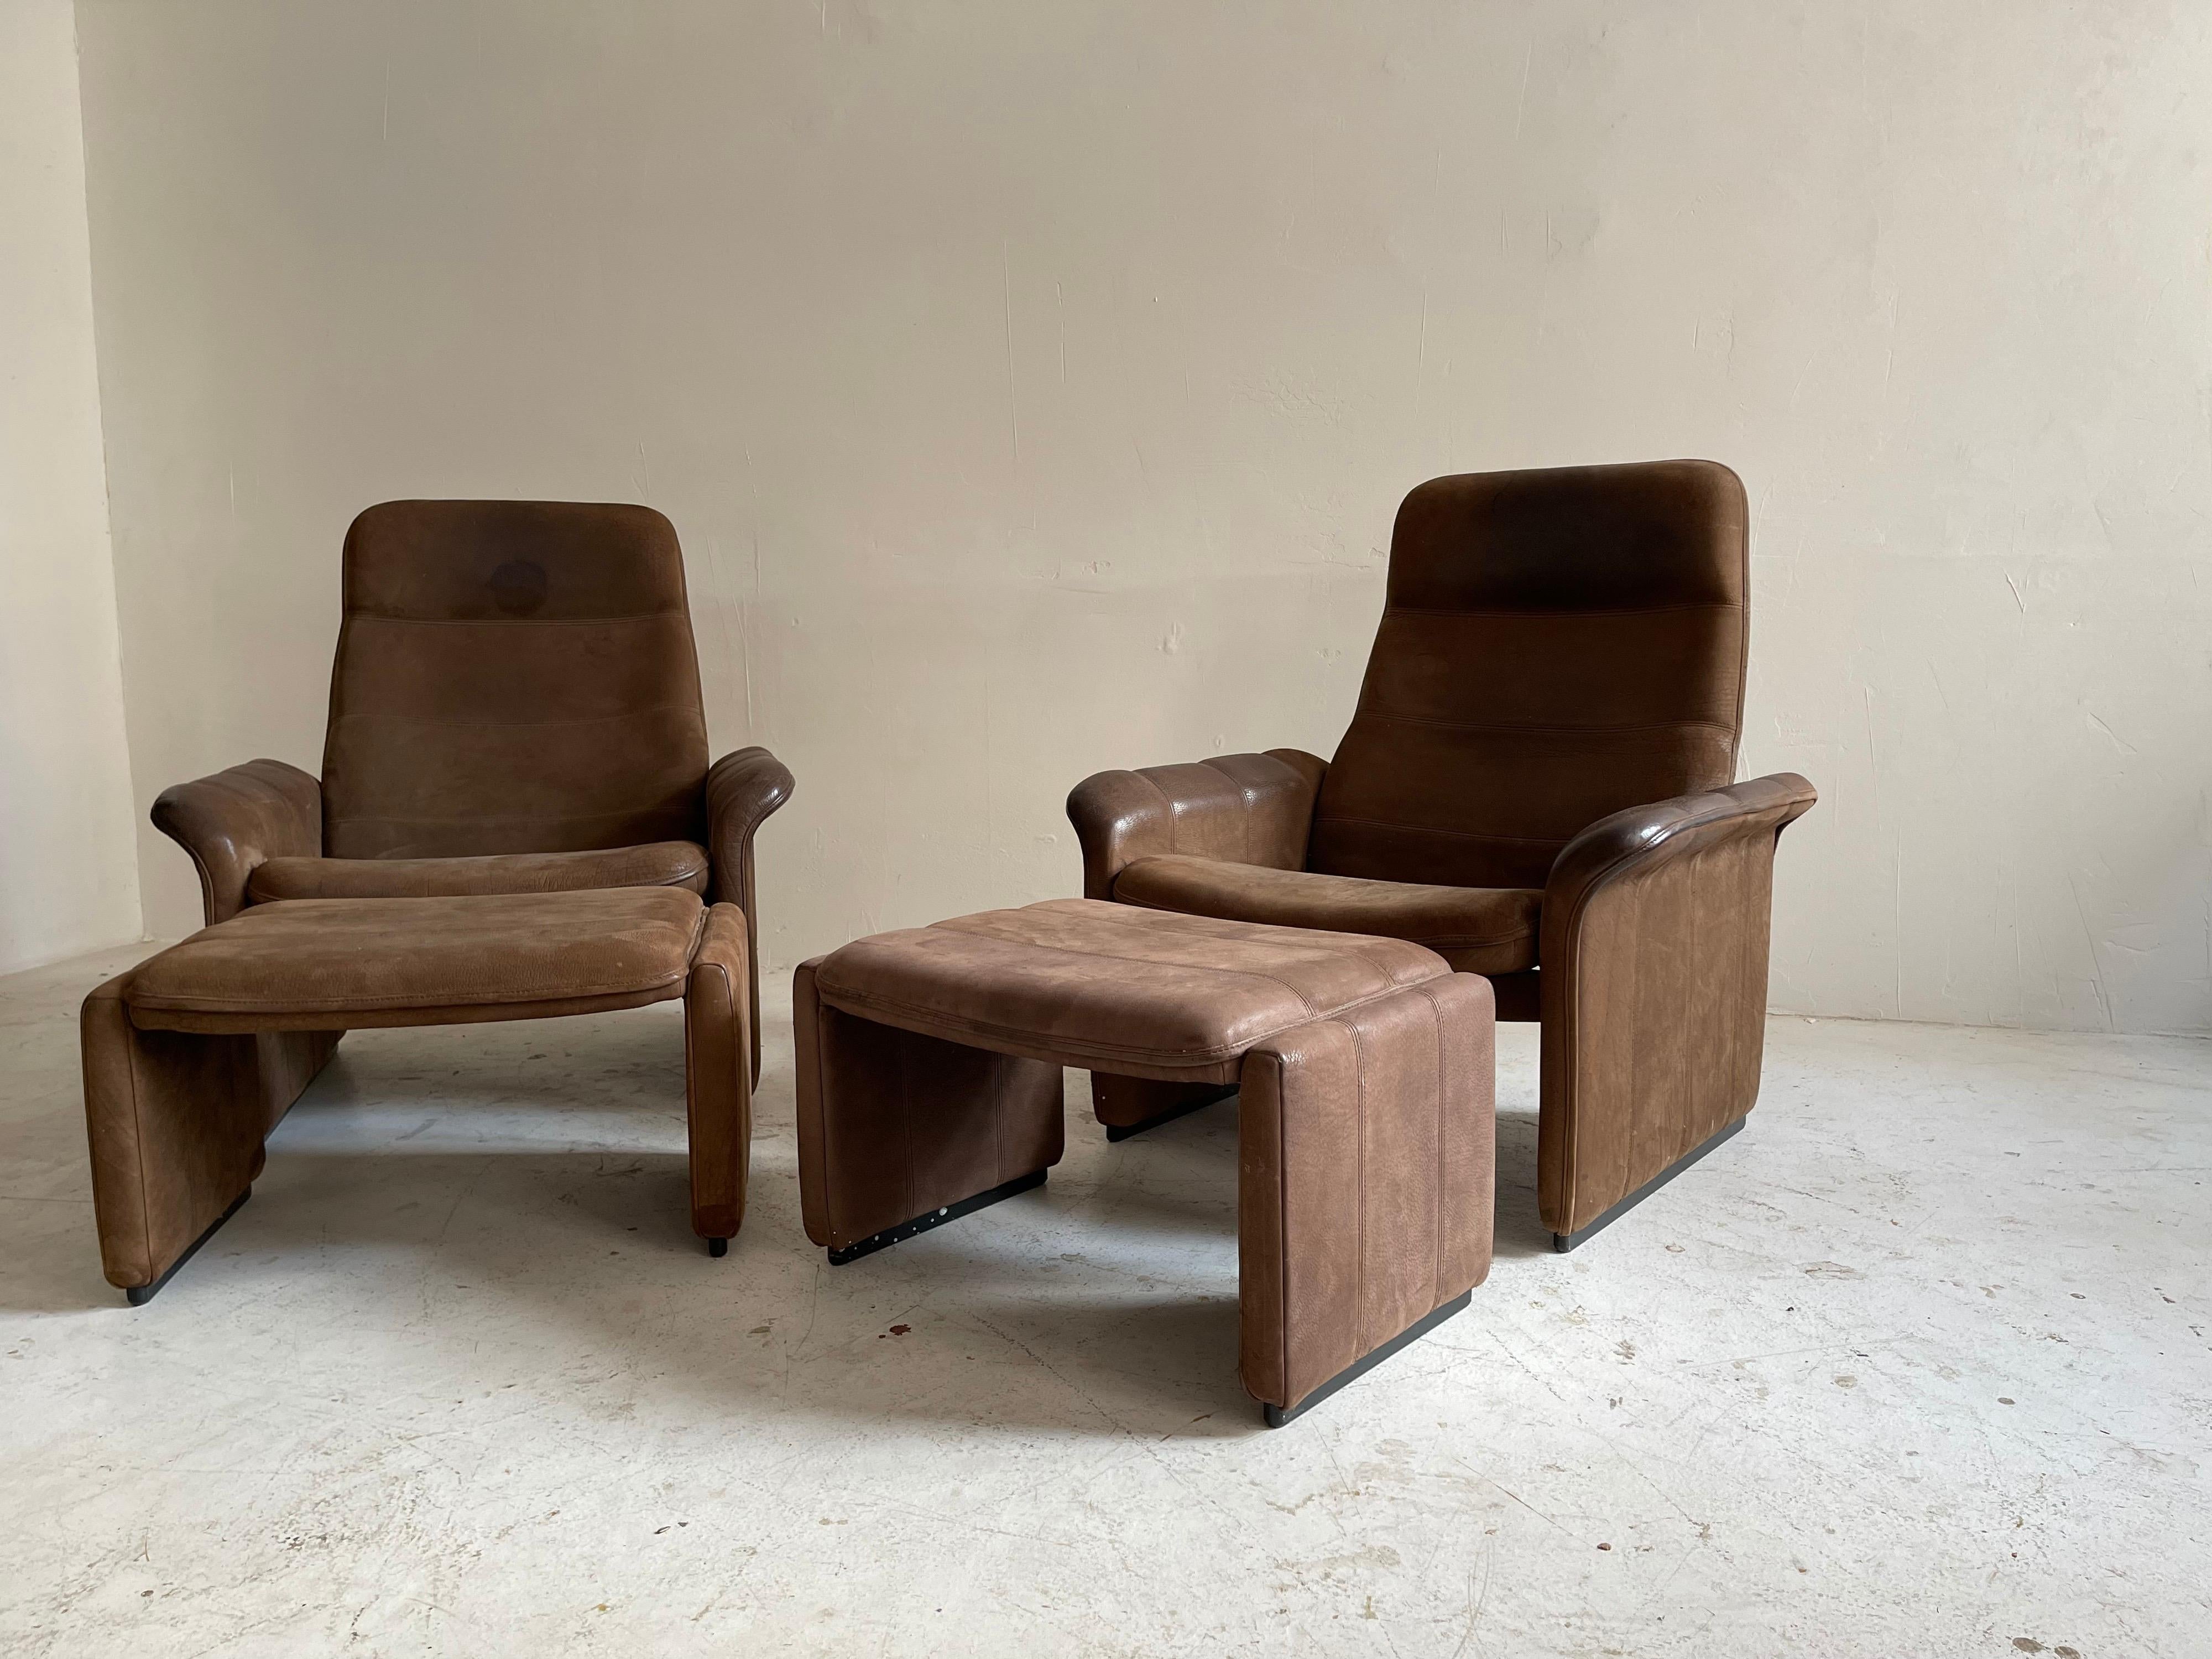 De Sede Pair Patinated Cognac Leather Reclining DS50 Chairs, Switzerland, 1970s. A special and rare find with matching ottomans.